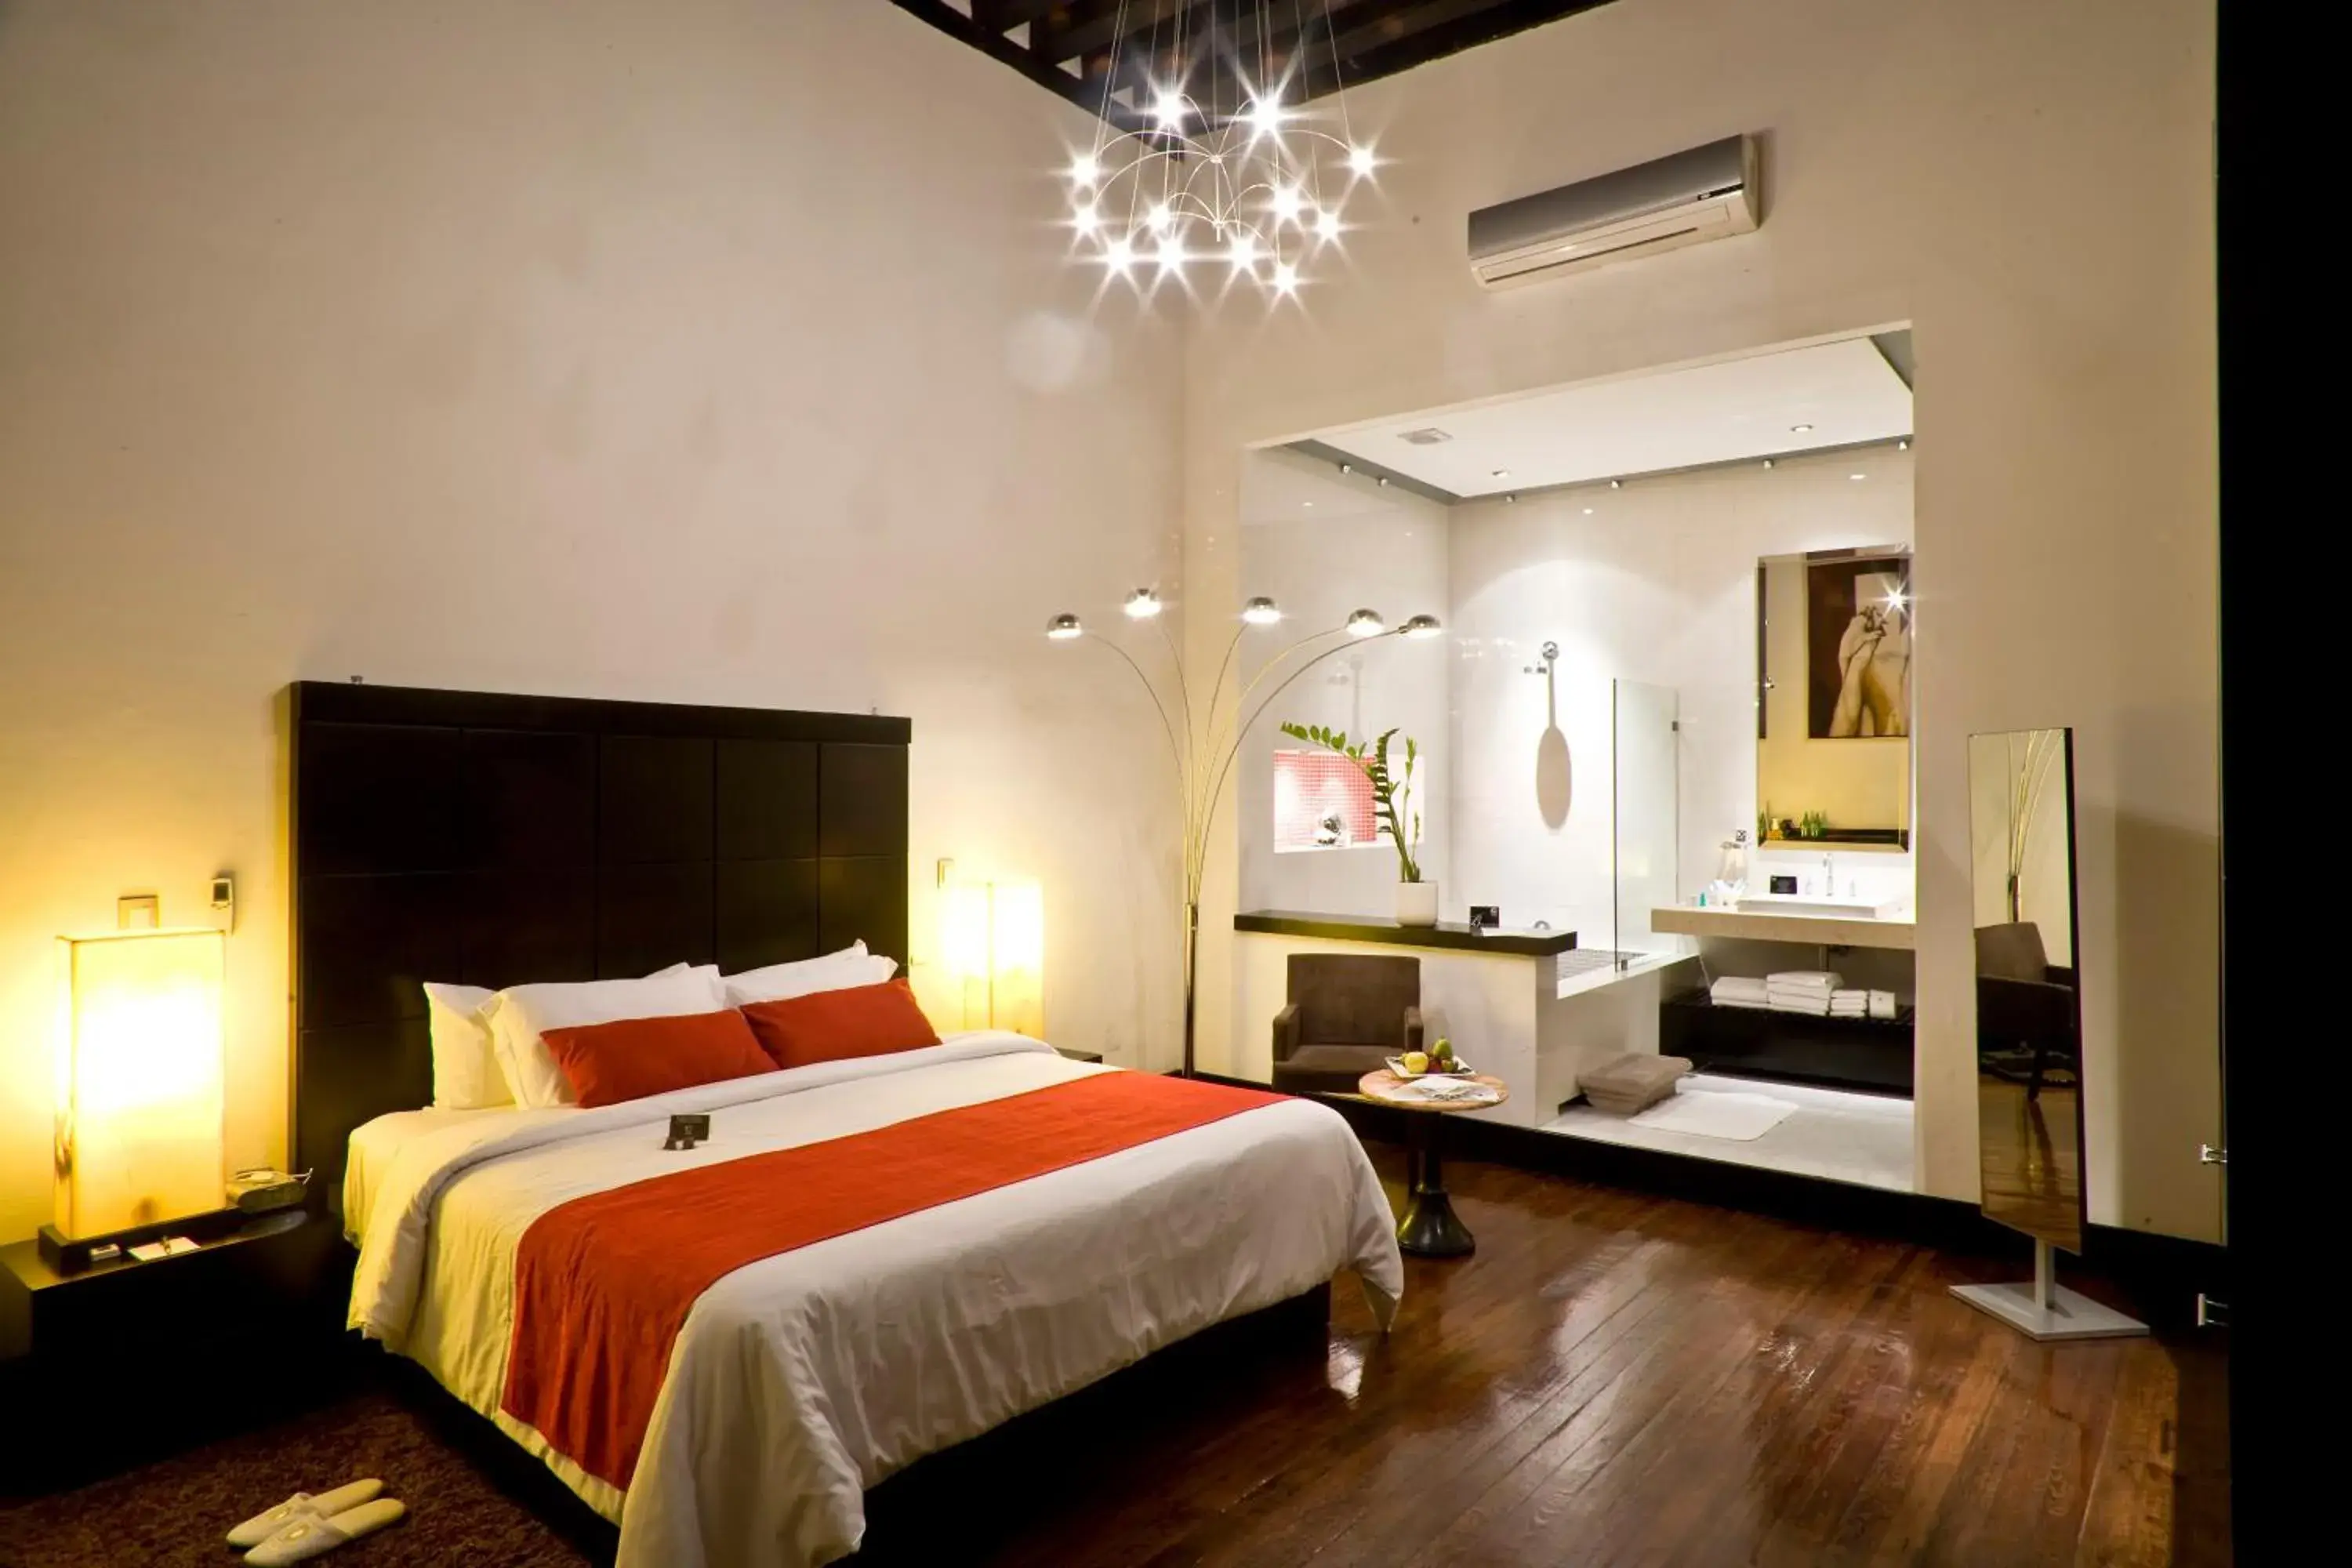 Bed, Room Photo in Cantera 10 Hotel Boutique